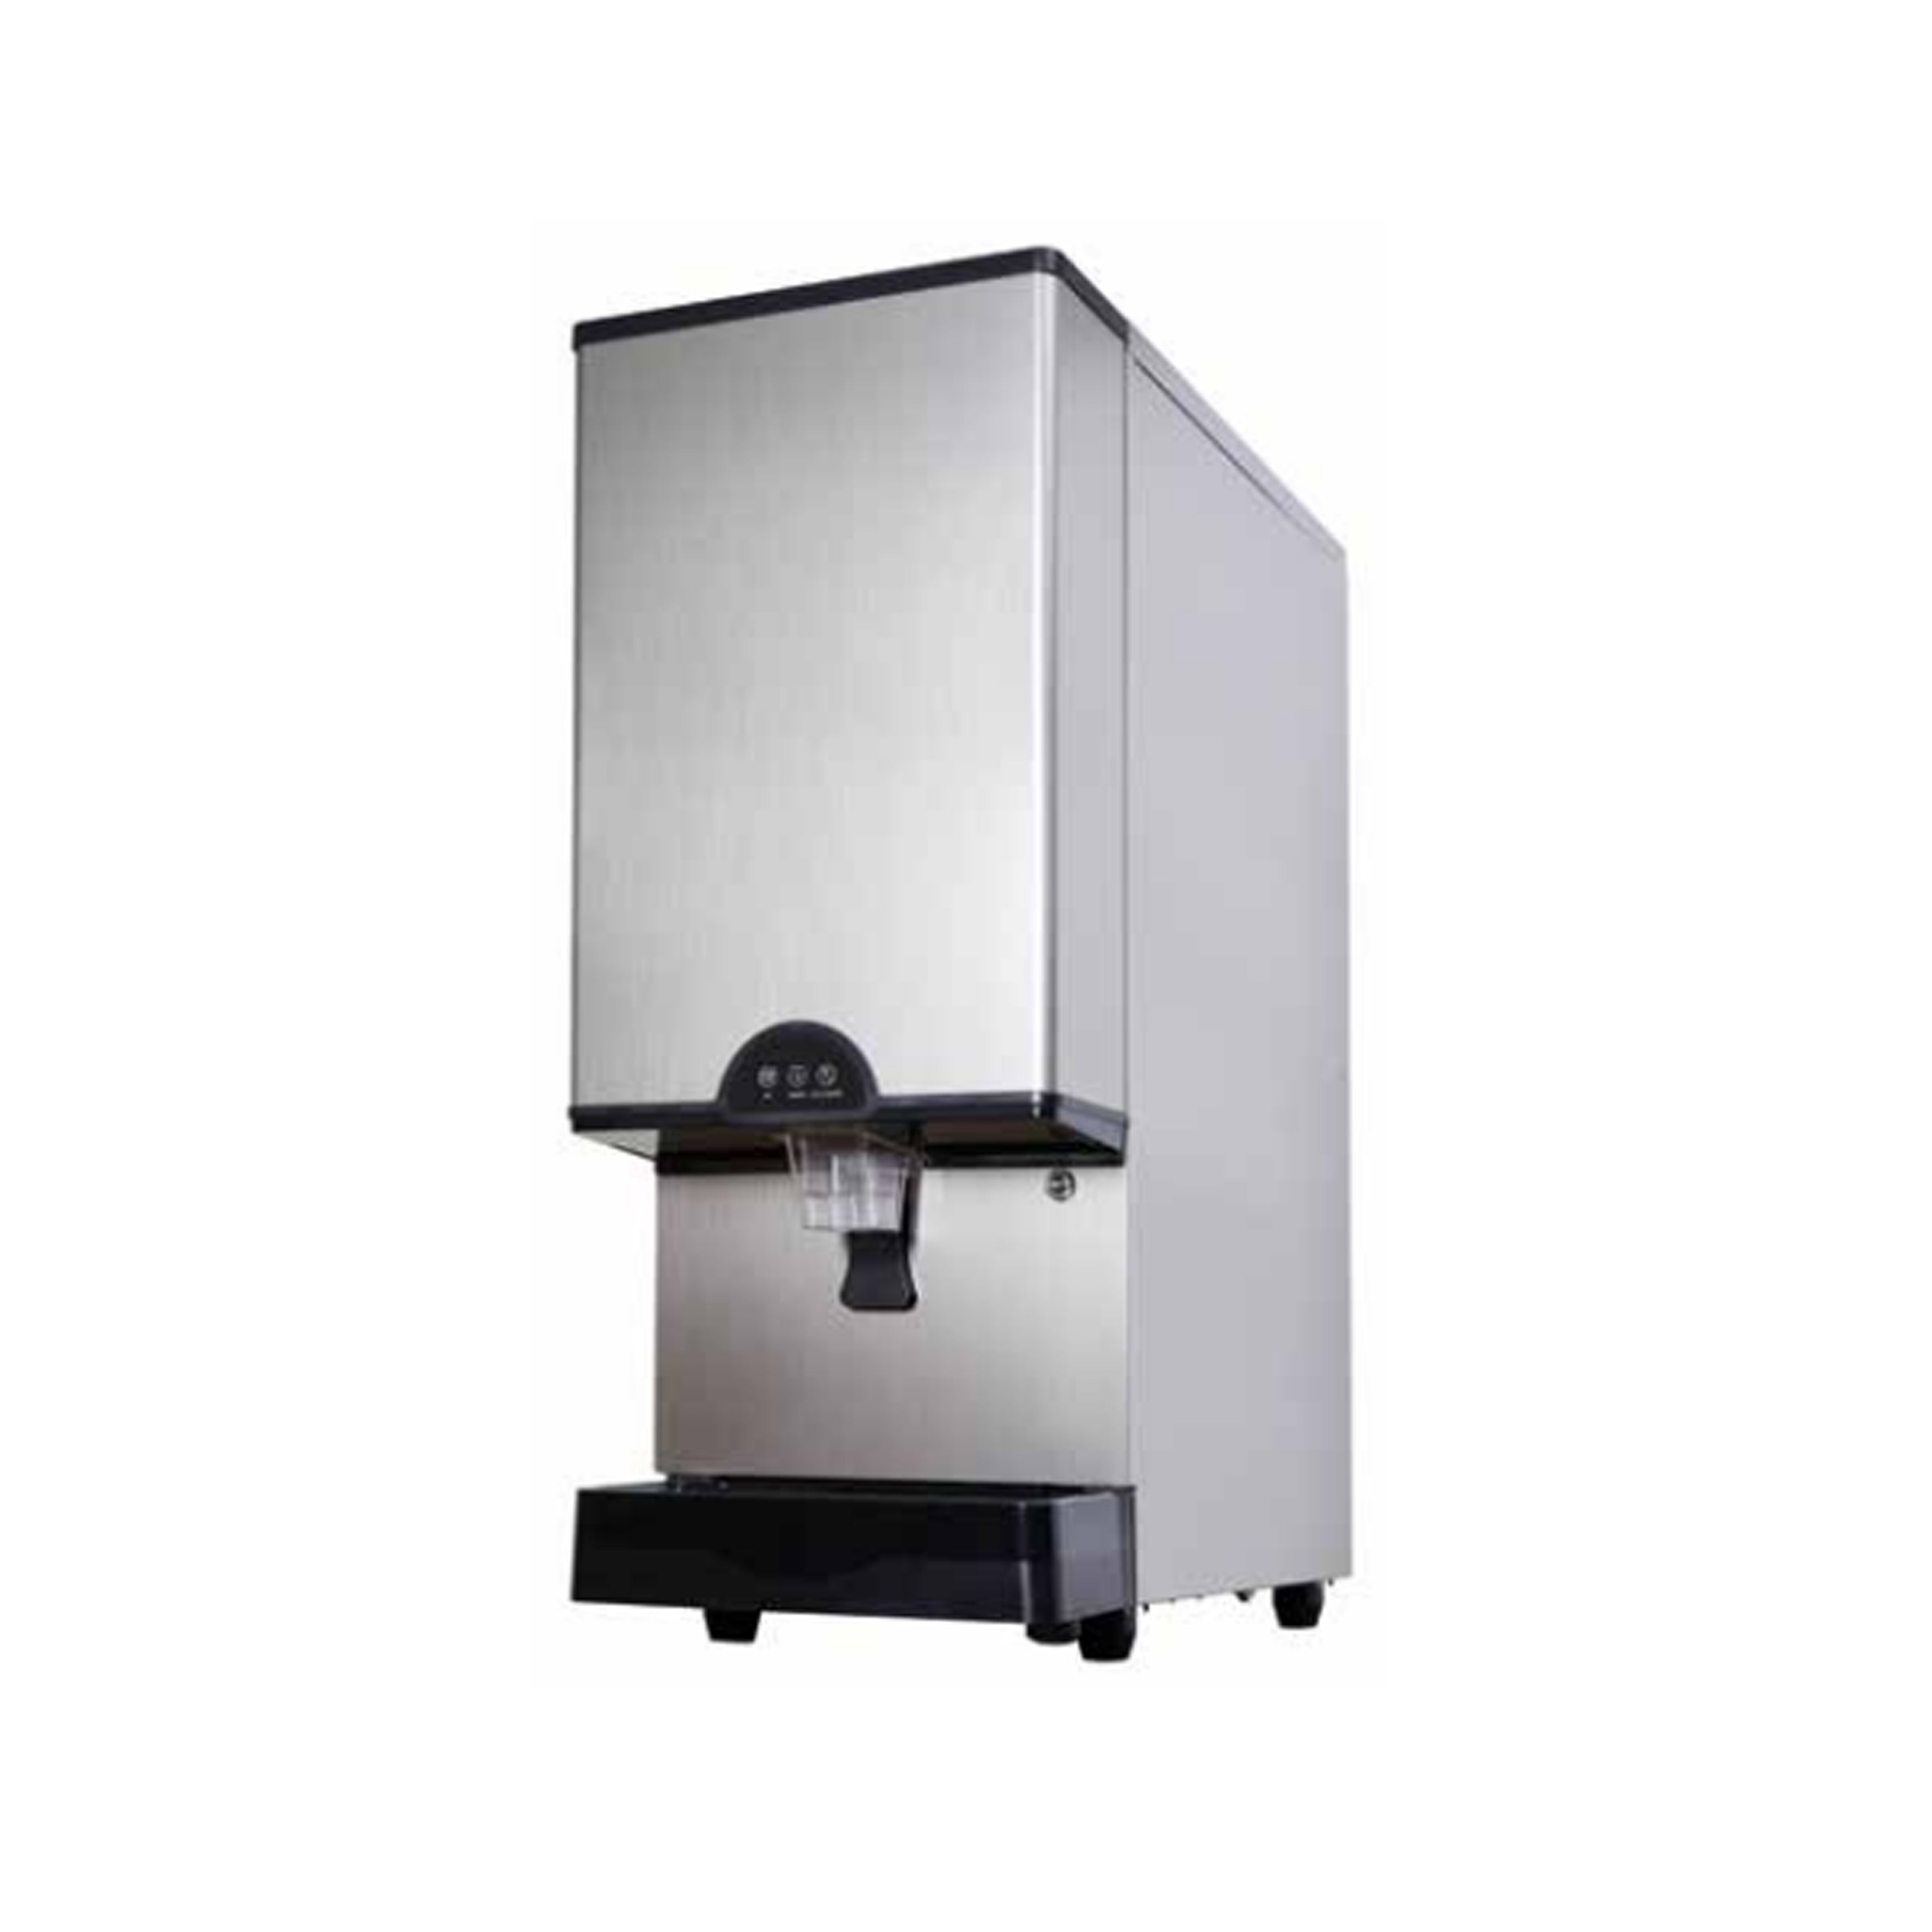 Icetro - ID-0450-AN, Commercial 16.6" Air Cooled Ice and Water Dispenser Nugget Ice Maker 378lbs